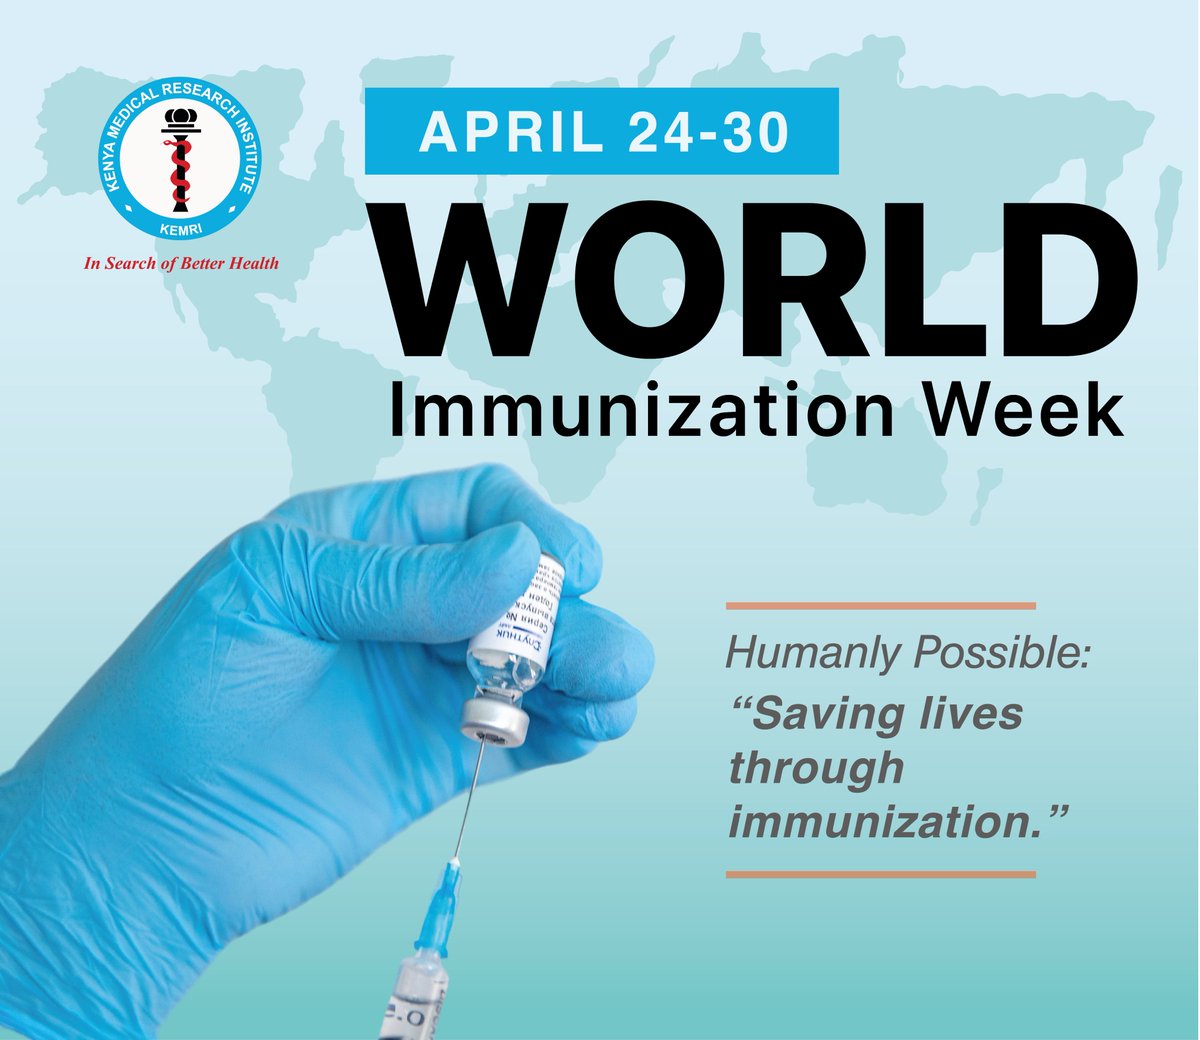 💉Immunization is a global public health and development success story, saving 3.5-5 million lives annually. This #WorldImmunizationWeek, let's celebrate the incredible power of vaccines to protect lives, prevent disease, and build healthier communities worldwide. #VaccinesWork